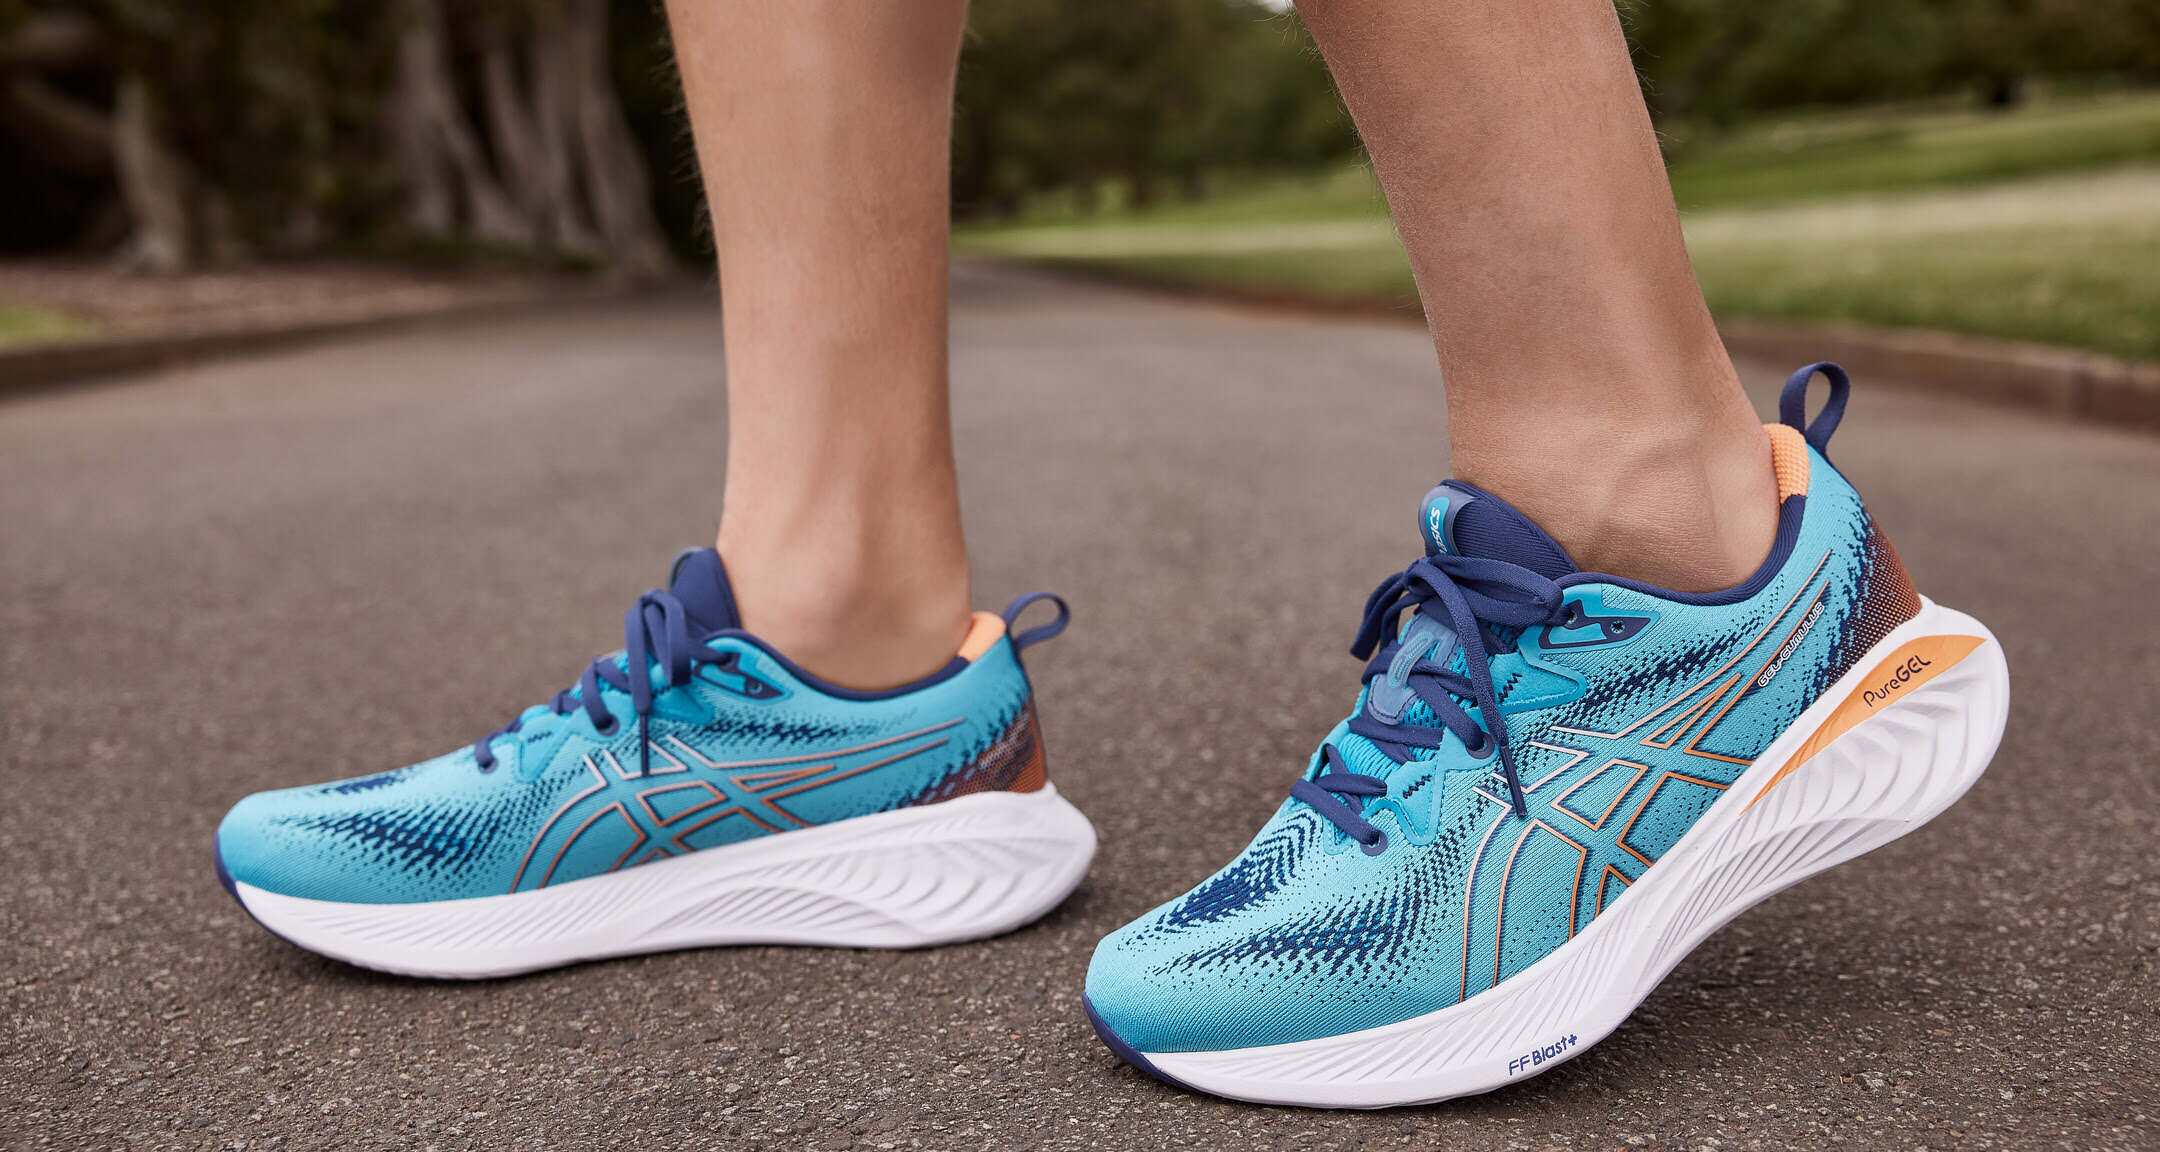 Best Running Shoes for Supination (Underpronation) 2020 - Buyer's Guide